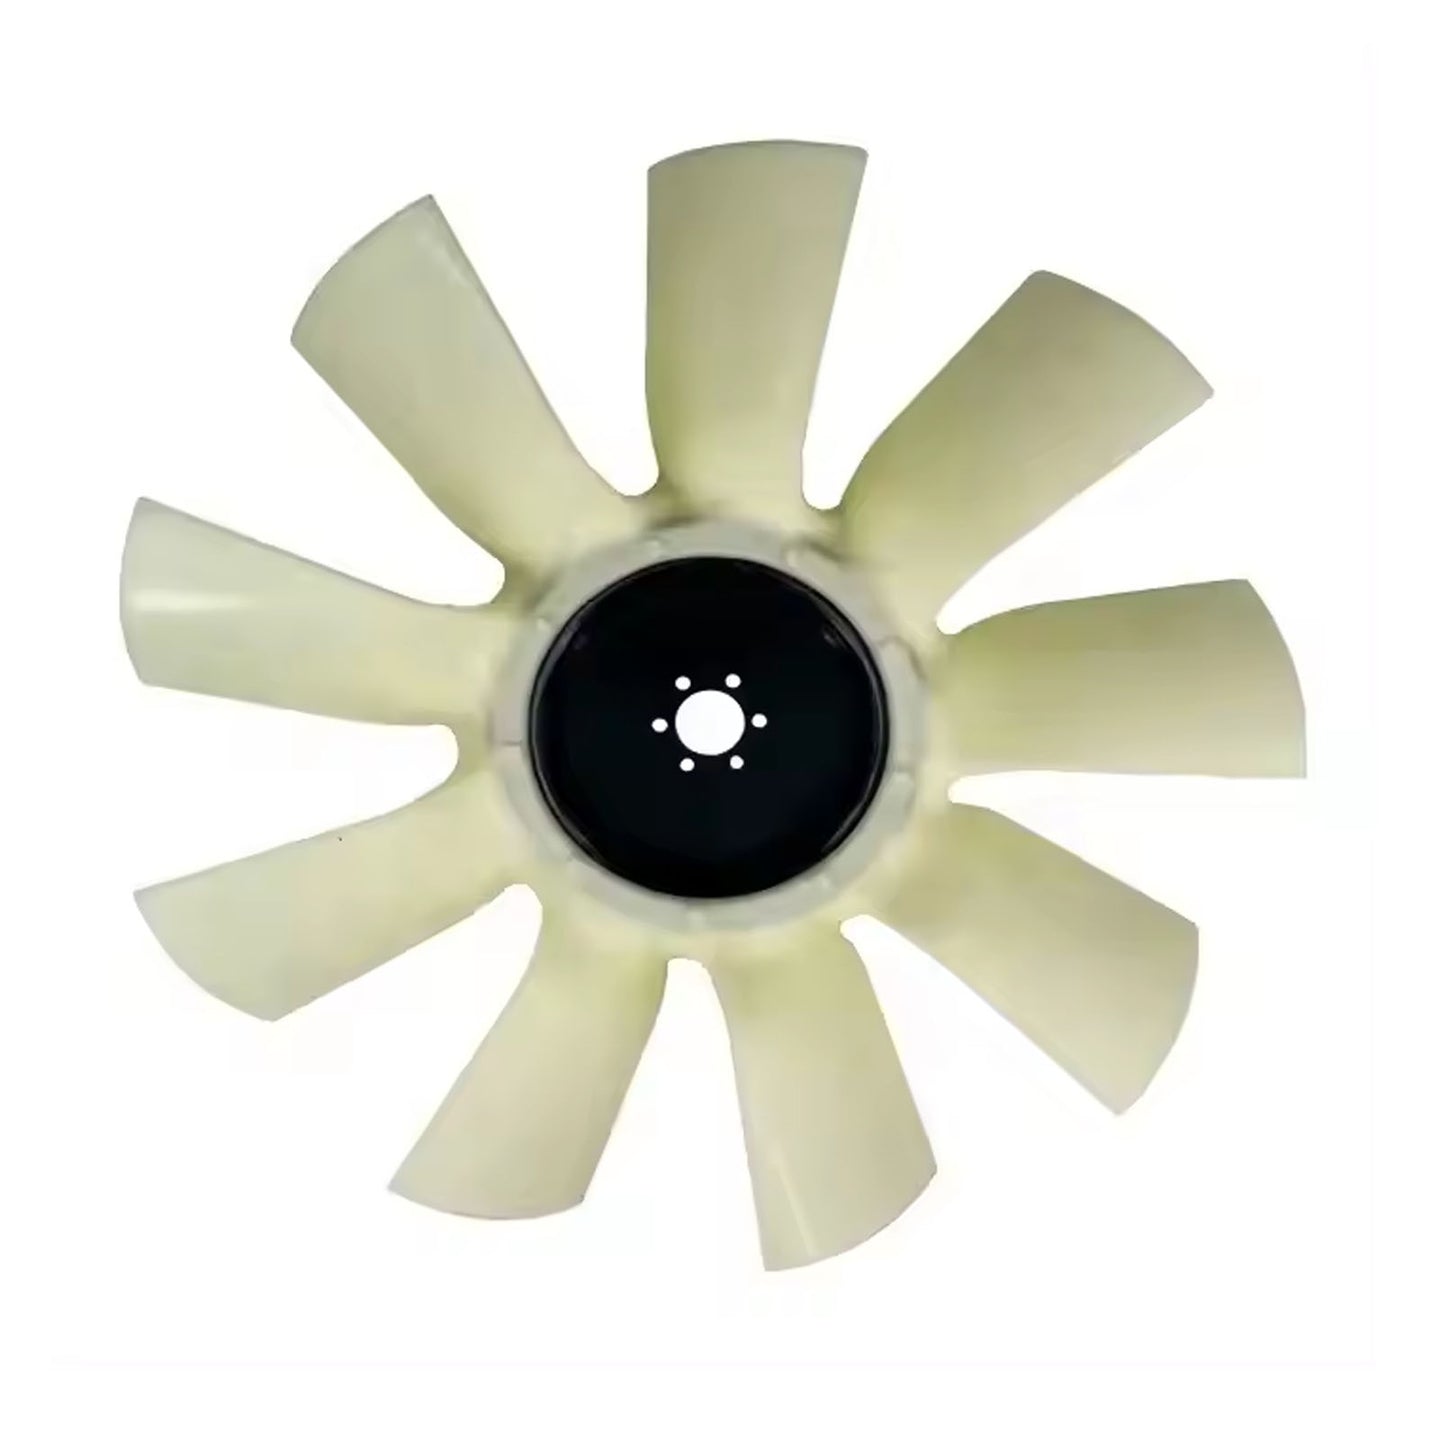 New Cooling Fan Blade 8 Blade 6 Hole for Doosan Excavator DH300-5 DH300-7 Engine